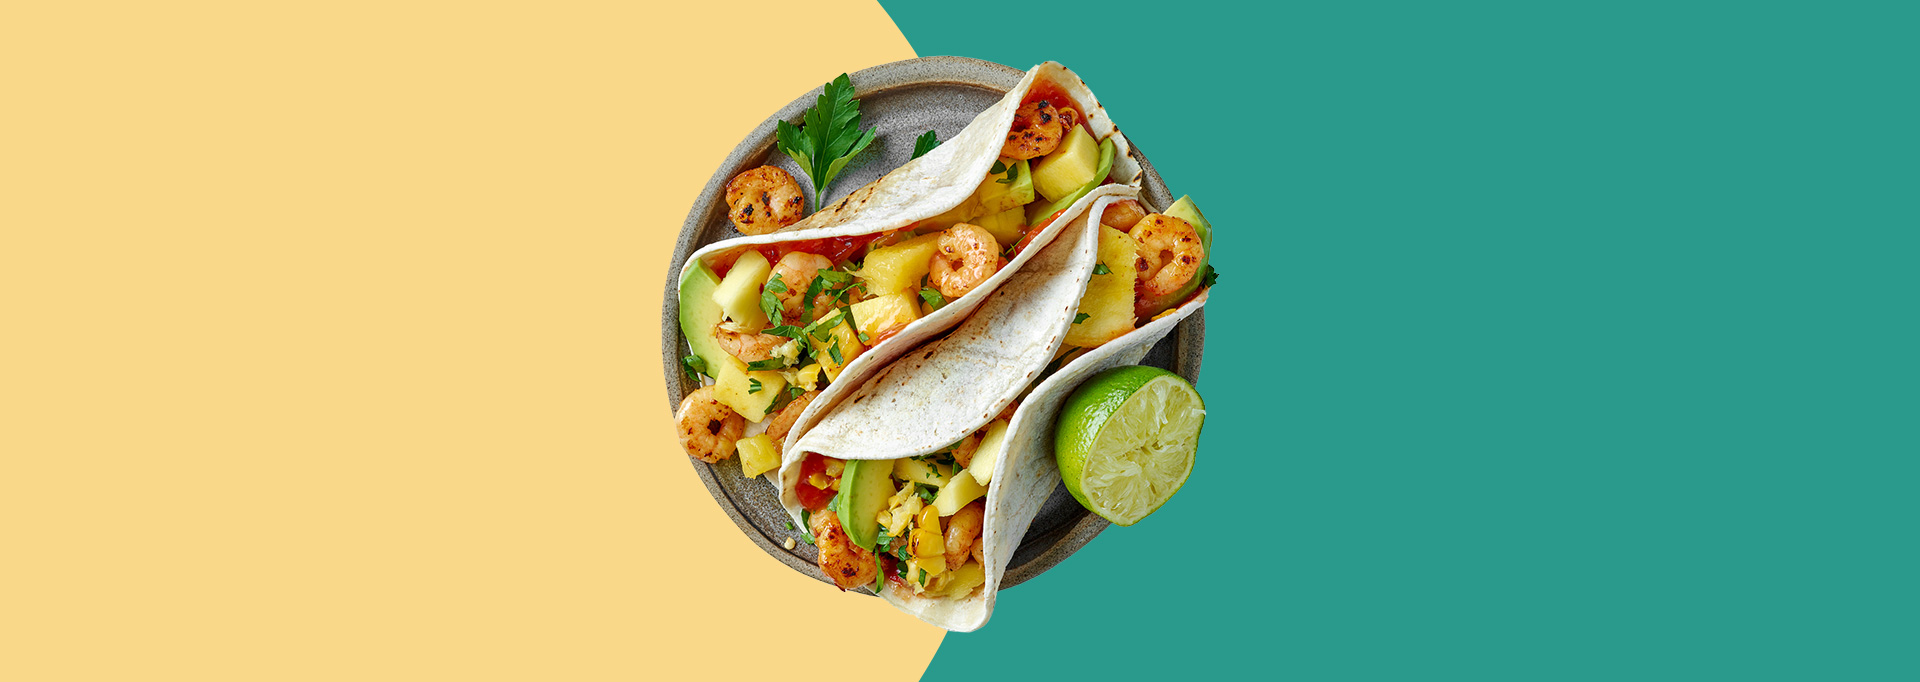 tacos on colorful background